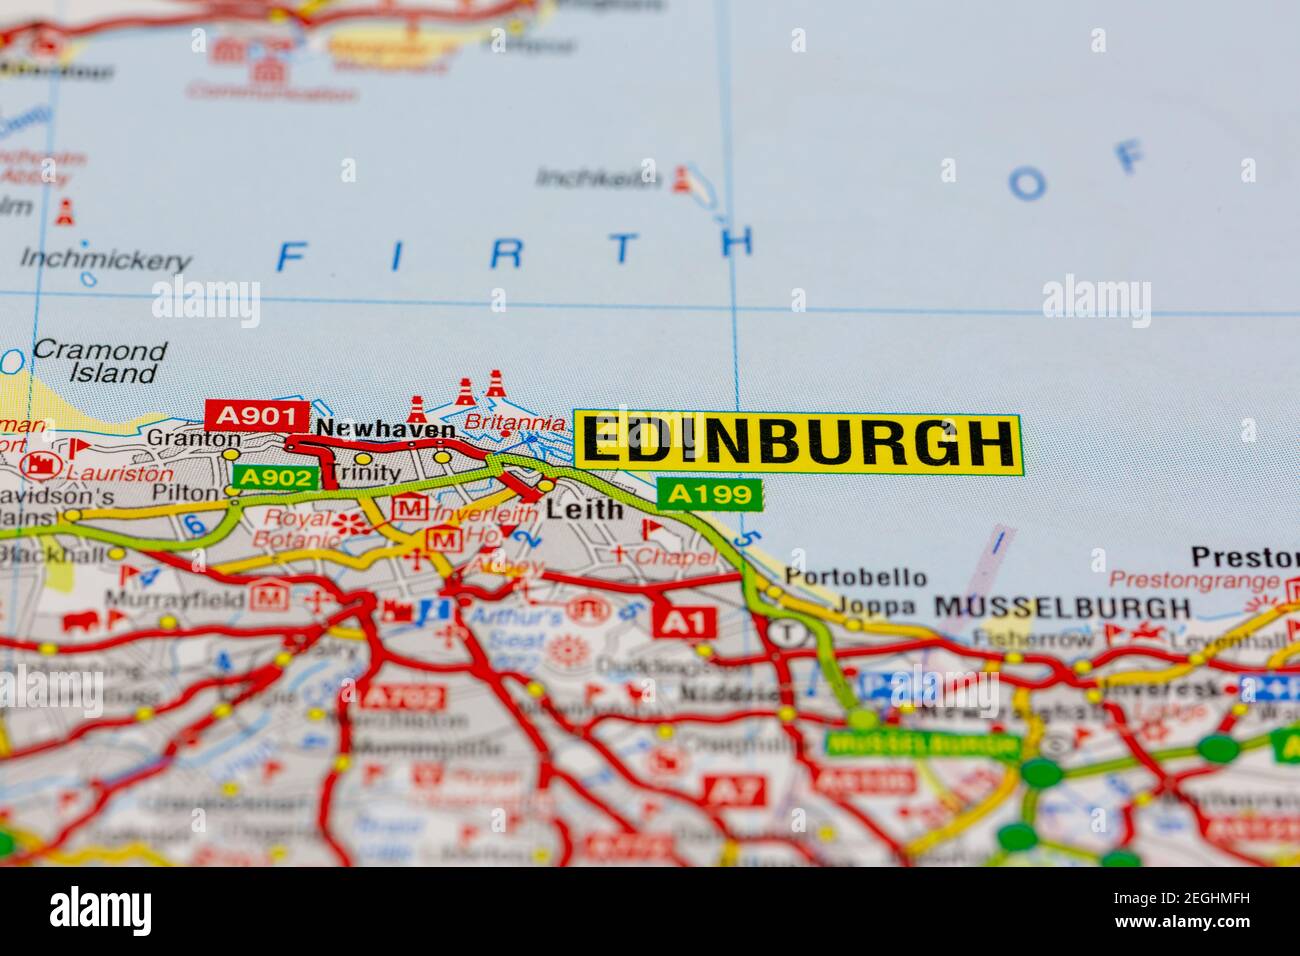 Edinburgh and surrounding areas shown on a road map or geography map Stock Photo